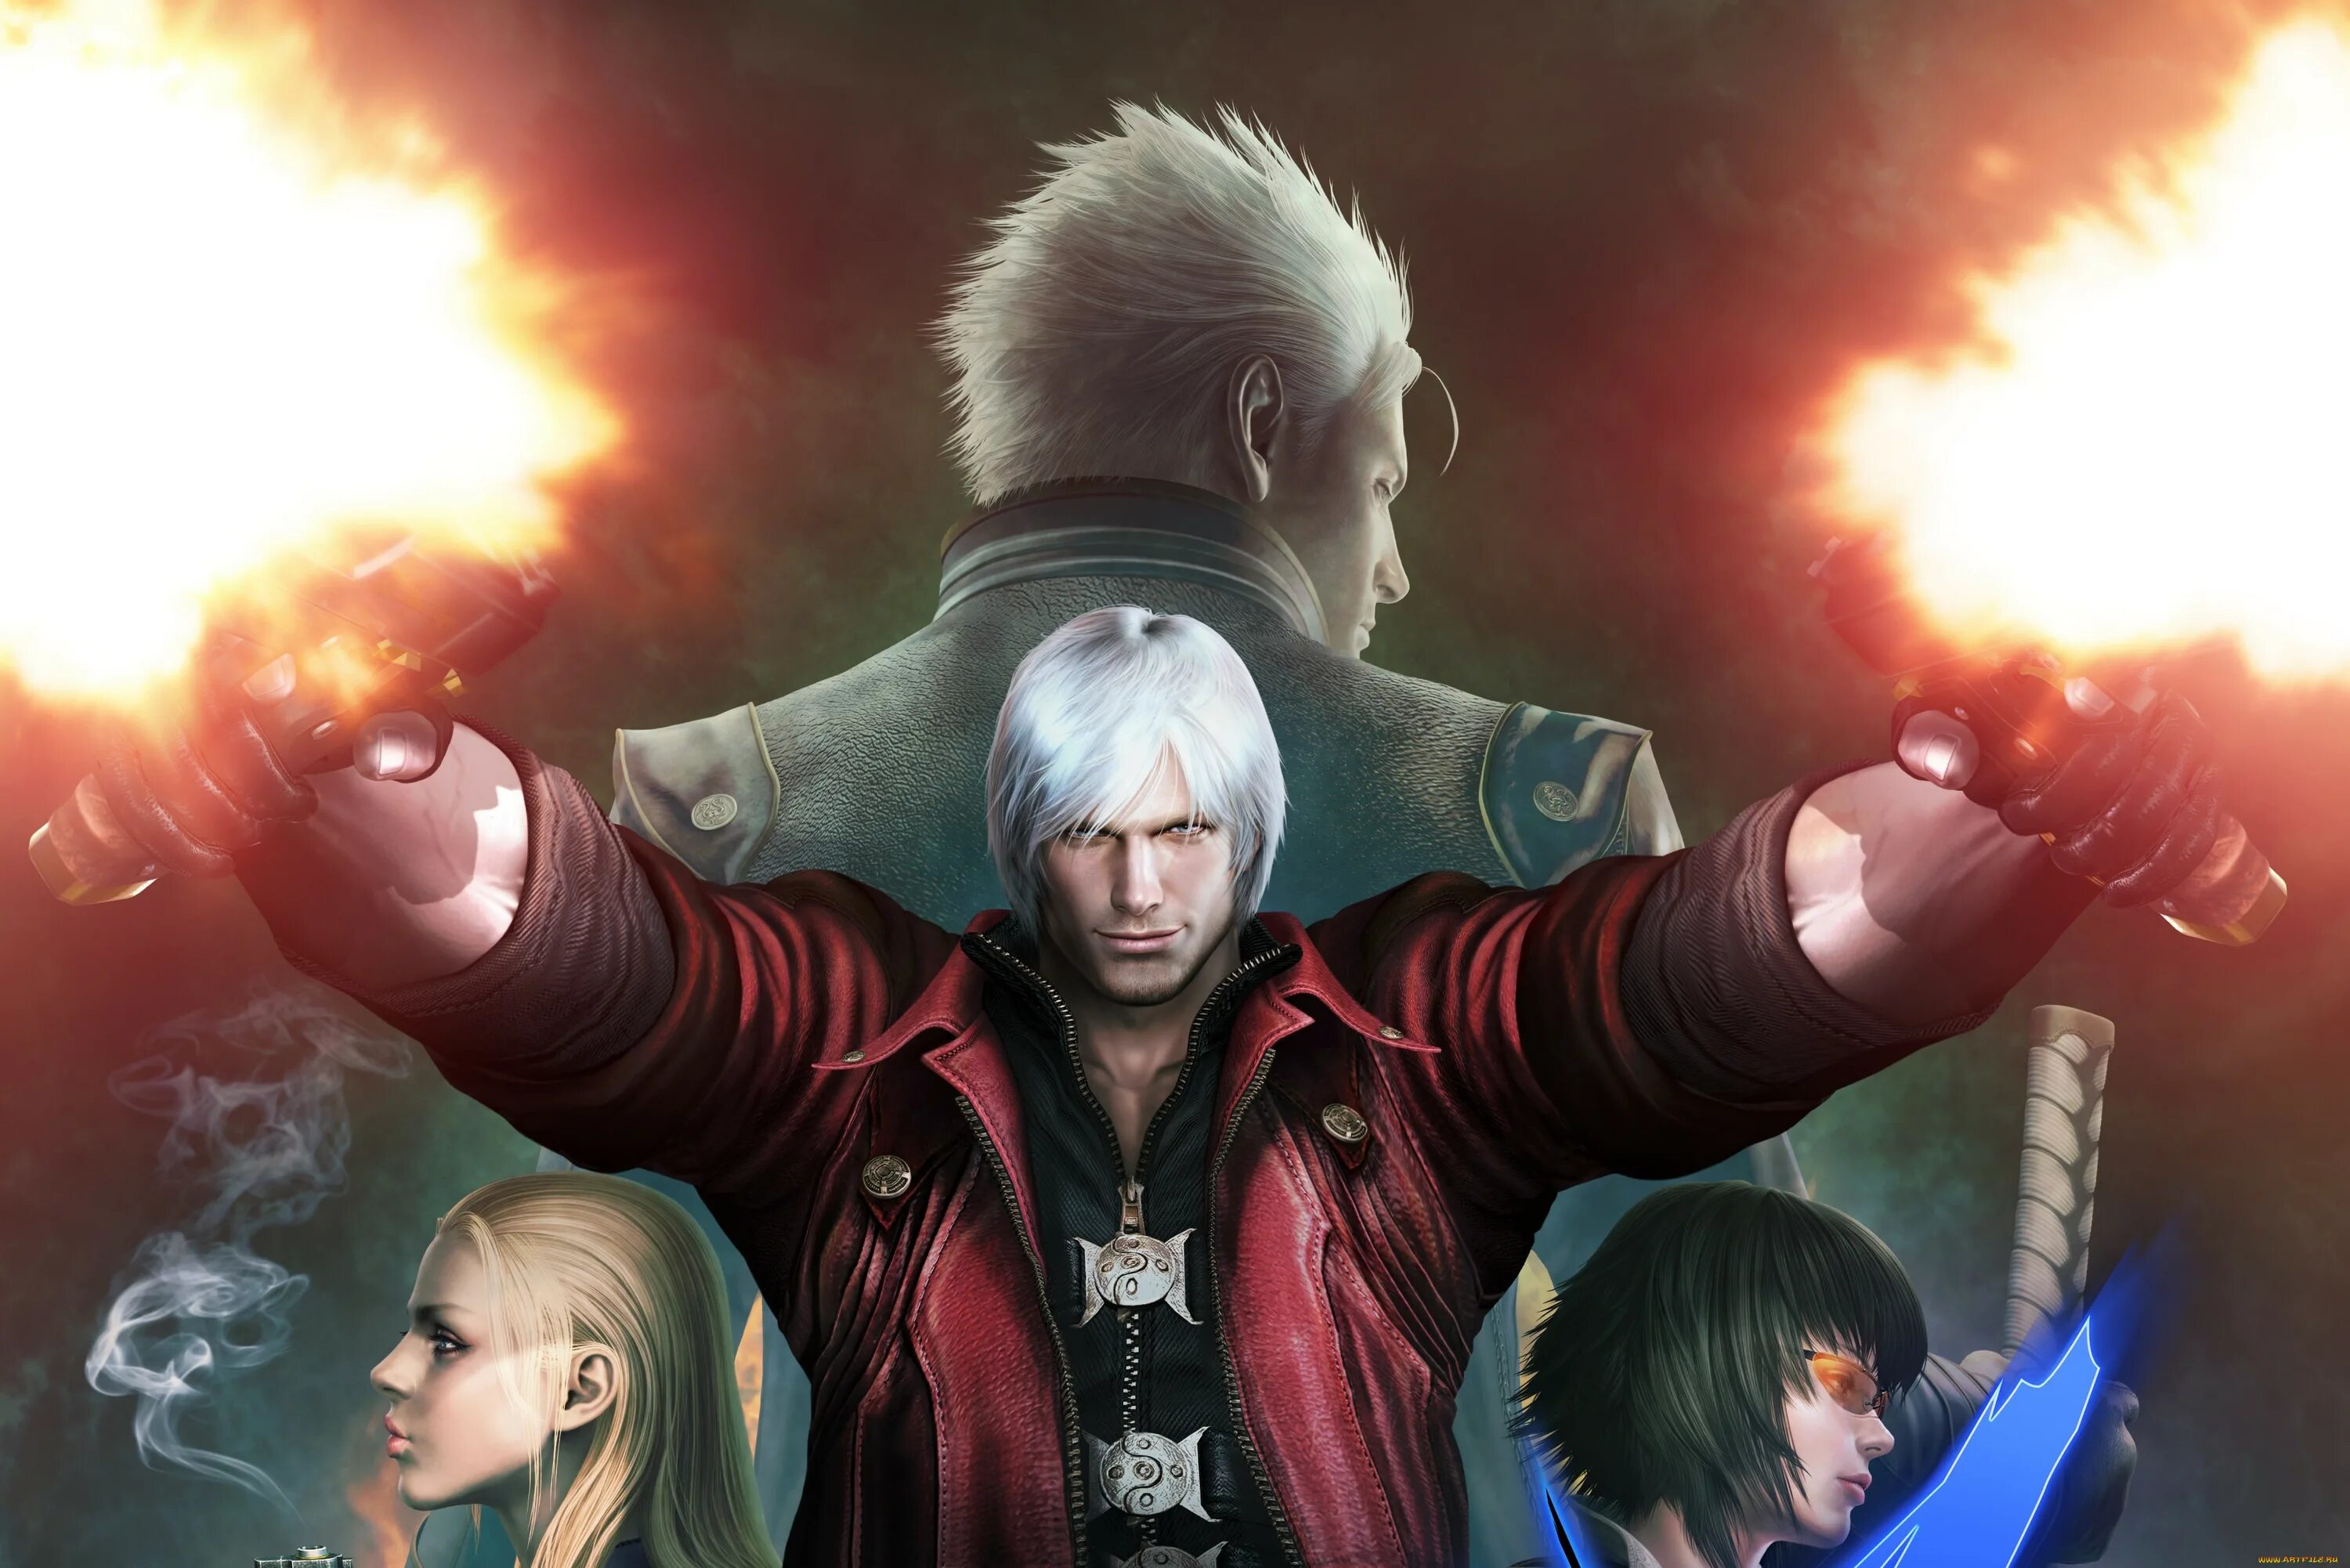 Games devil may cry. Данте Devil May Cry. Данте DMC 4. Данте ДМС 4. Devil May Cry 4 Данте.